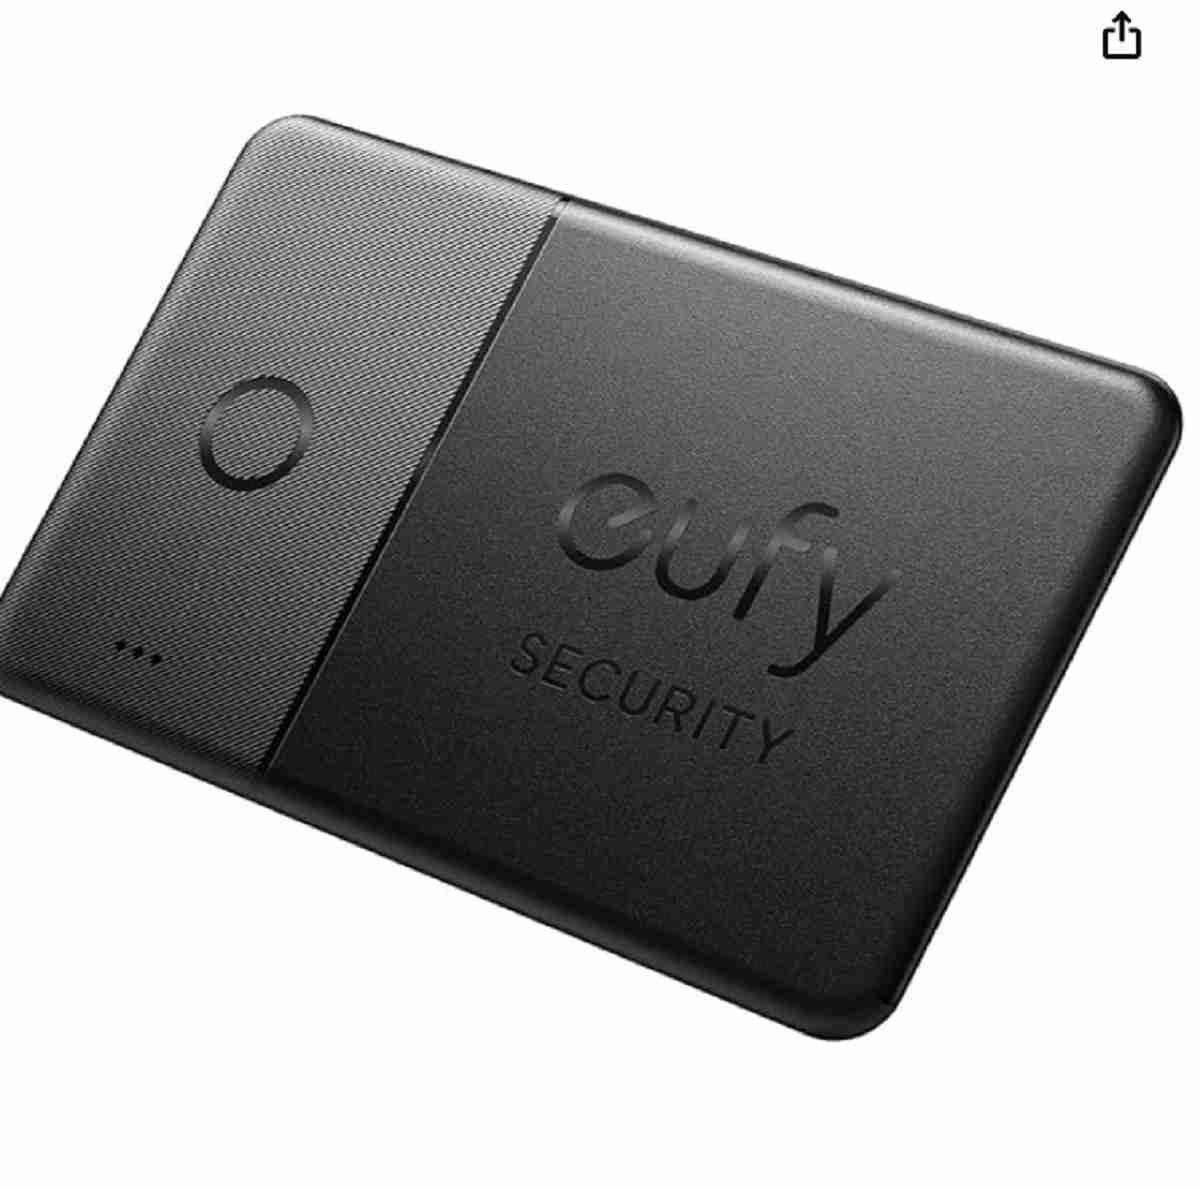 Ankerの「Anker Eufy (ユーフィ) Security SmartTrack Card」をご紹介